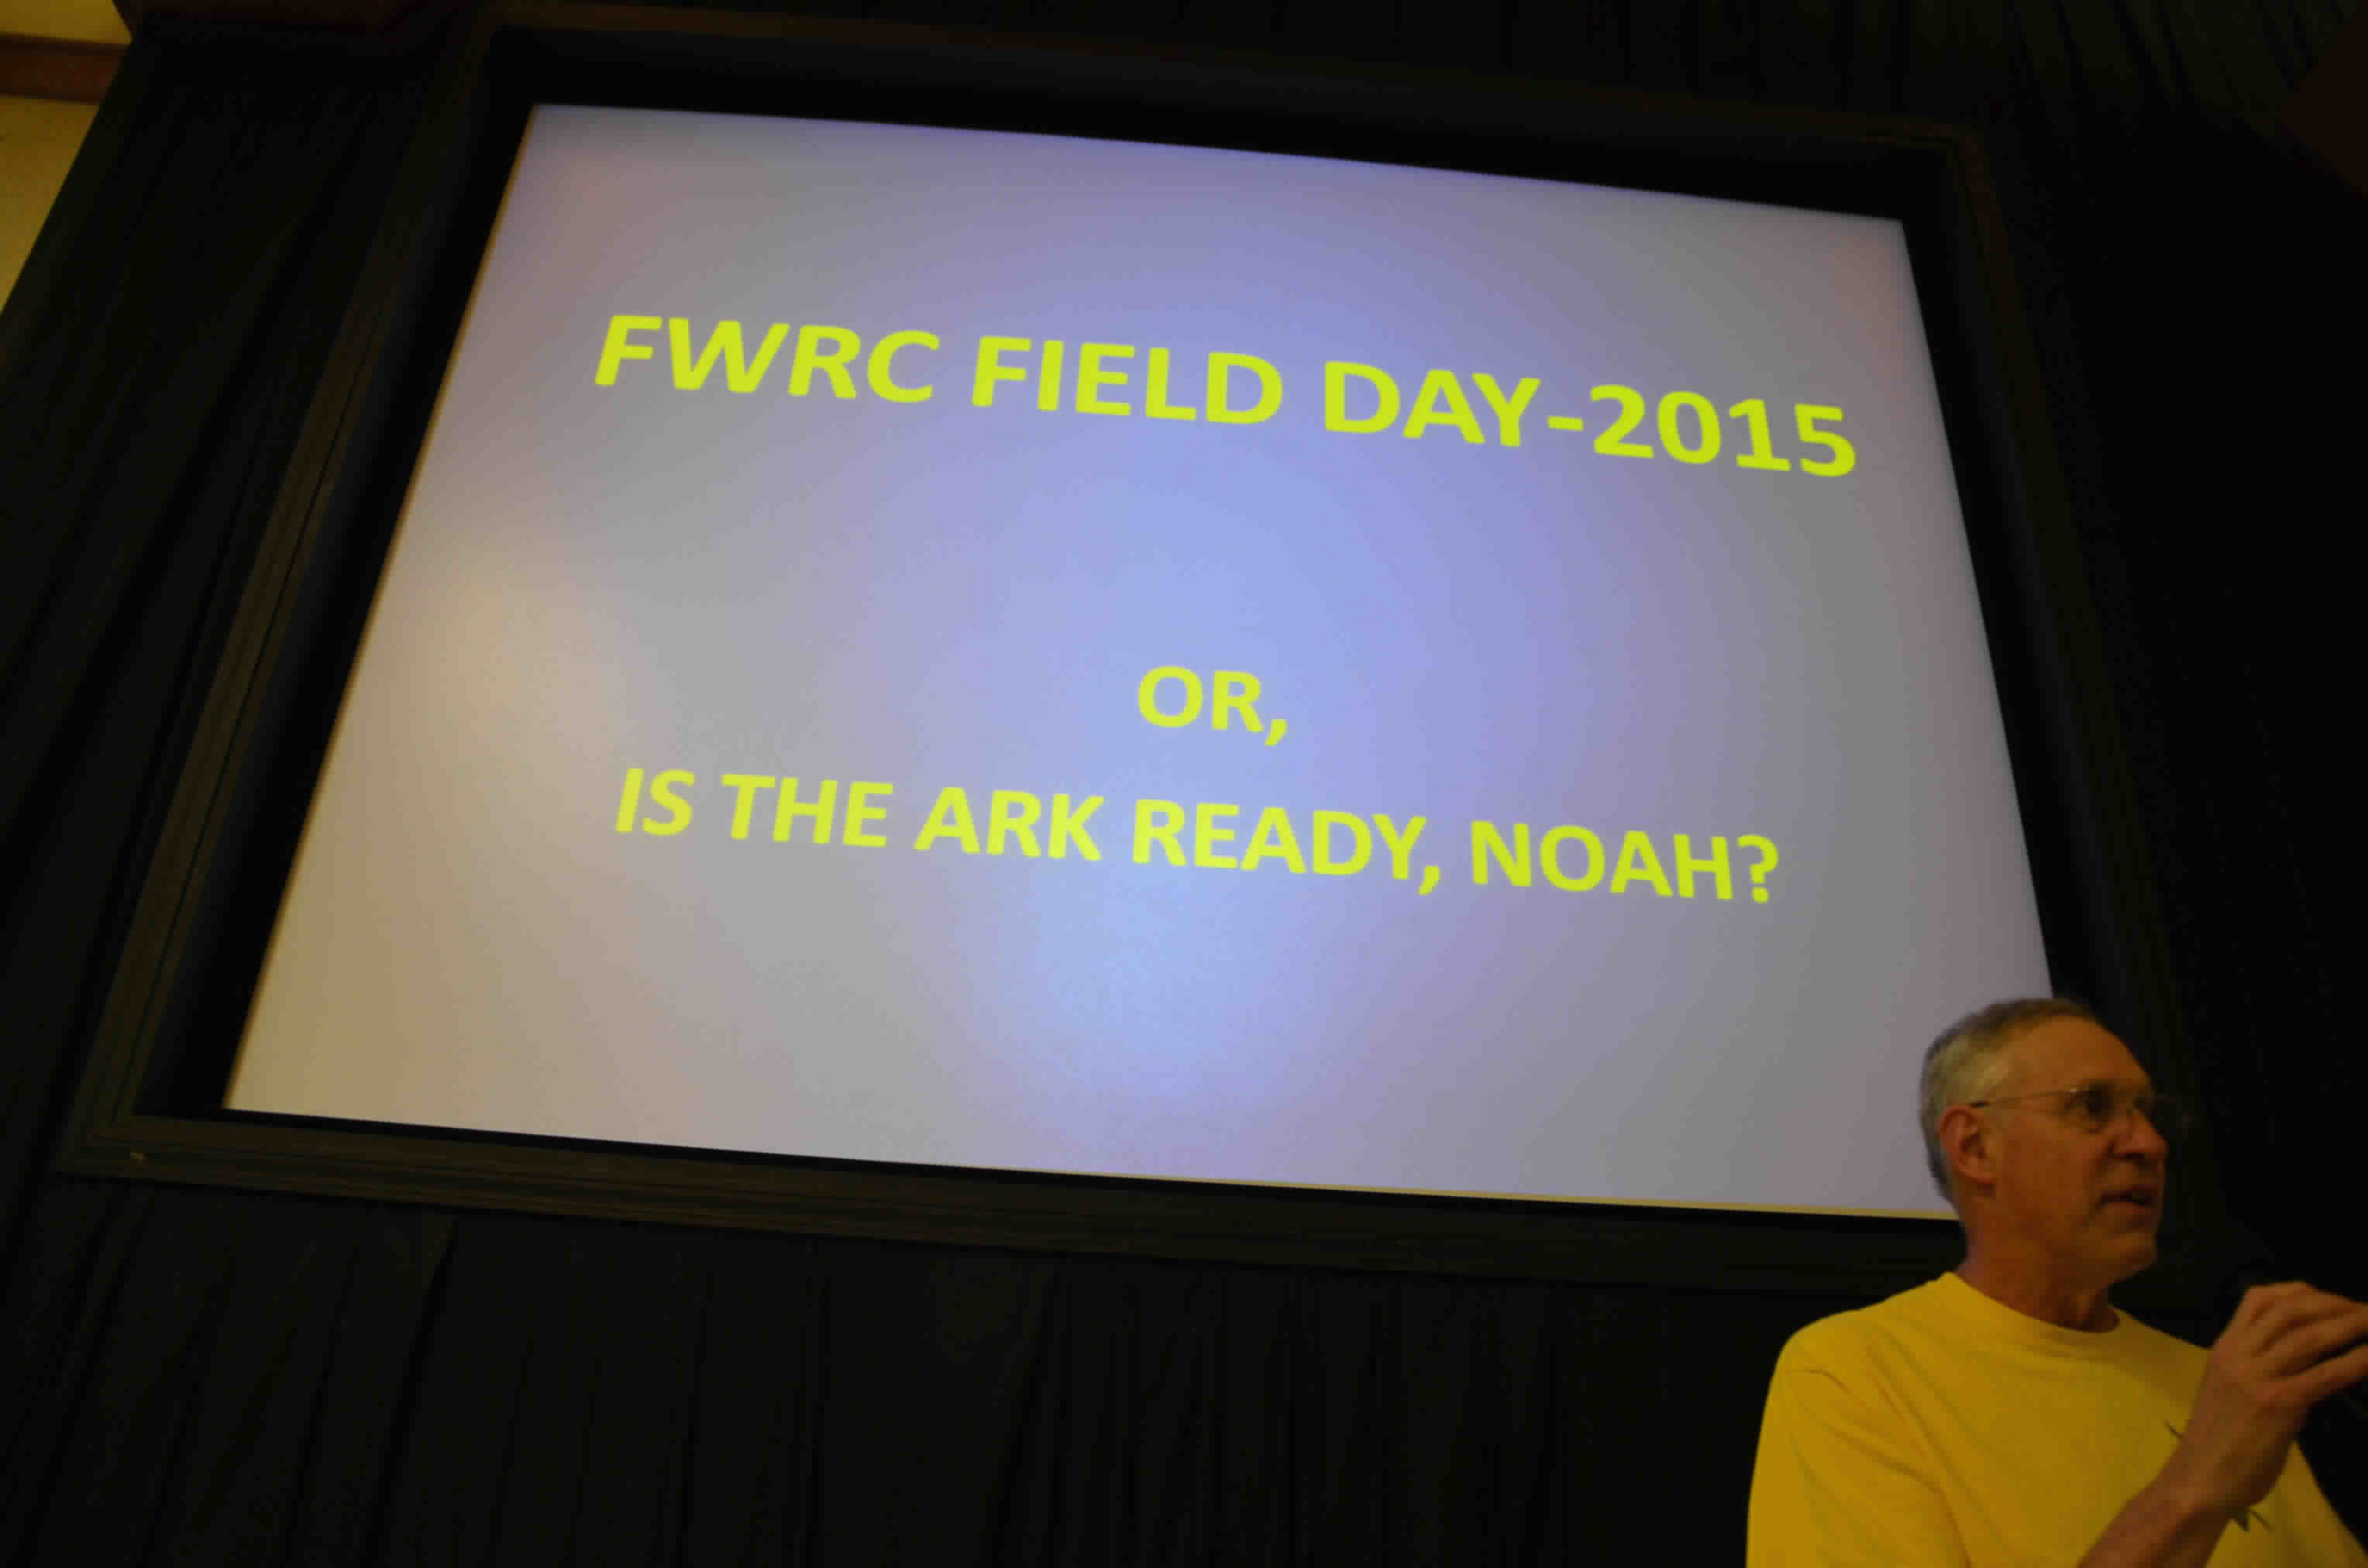 FWRC President Steve Nardin, W9SAN, presents informatoin about the club's June, 2015 ARRL Field Day operation during its July, 2015 general meeting